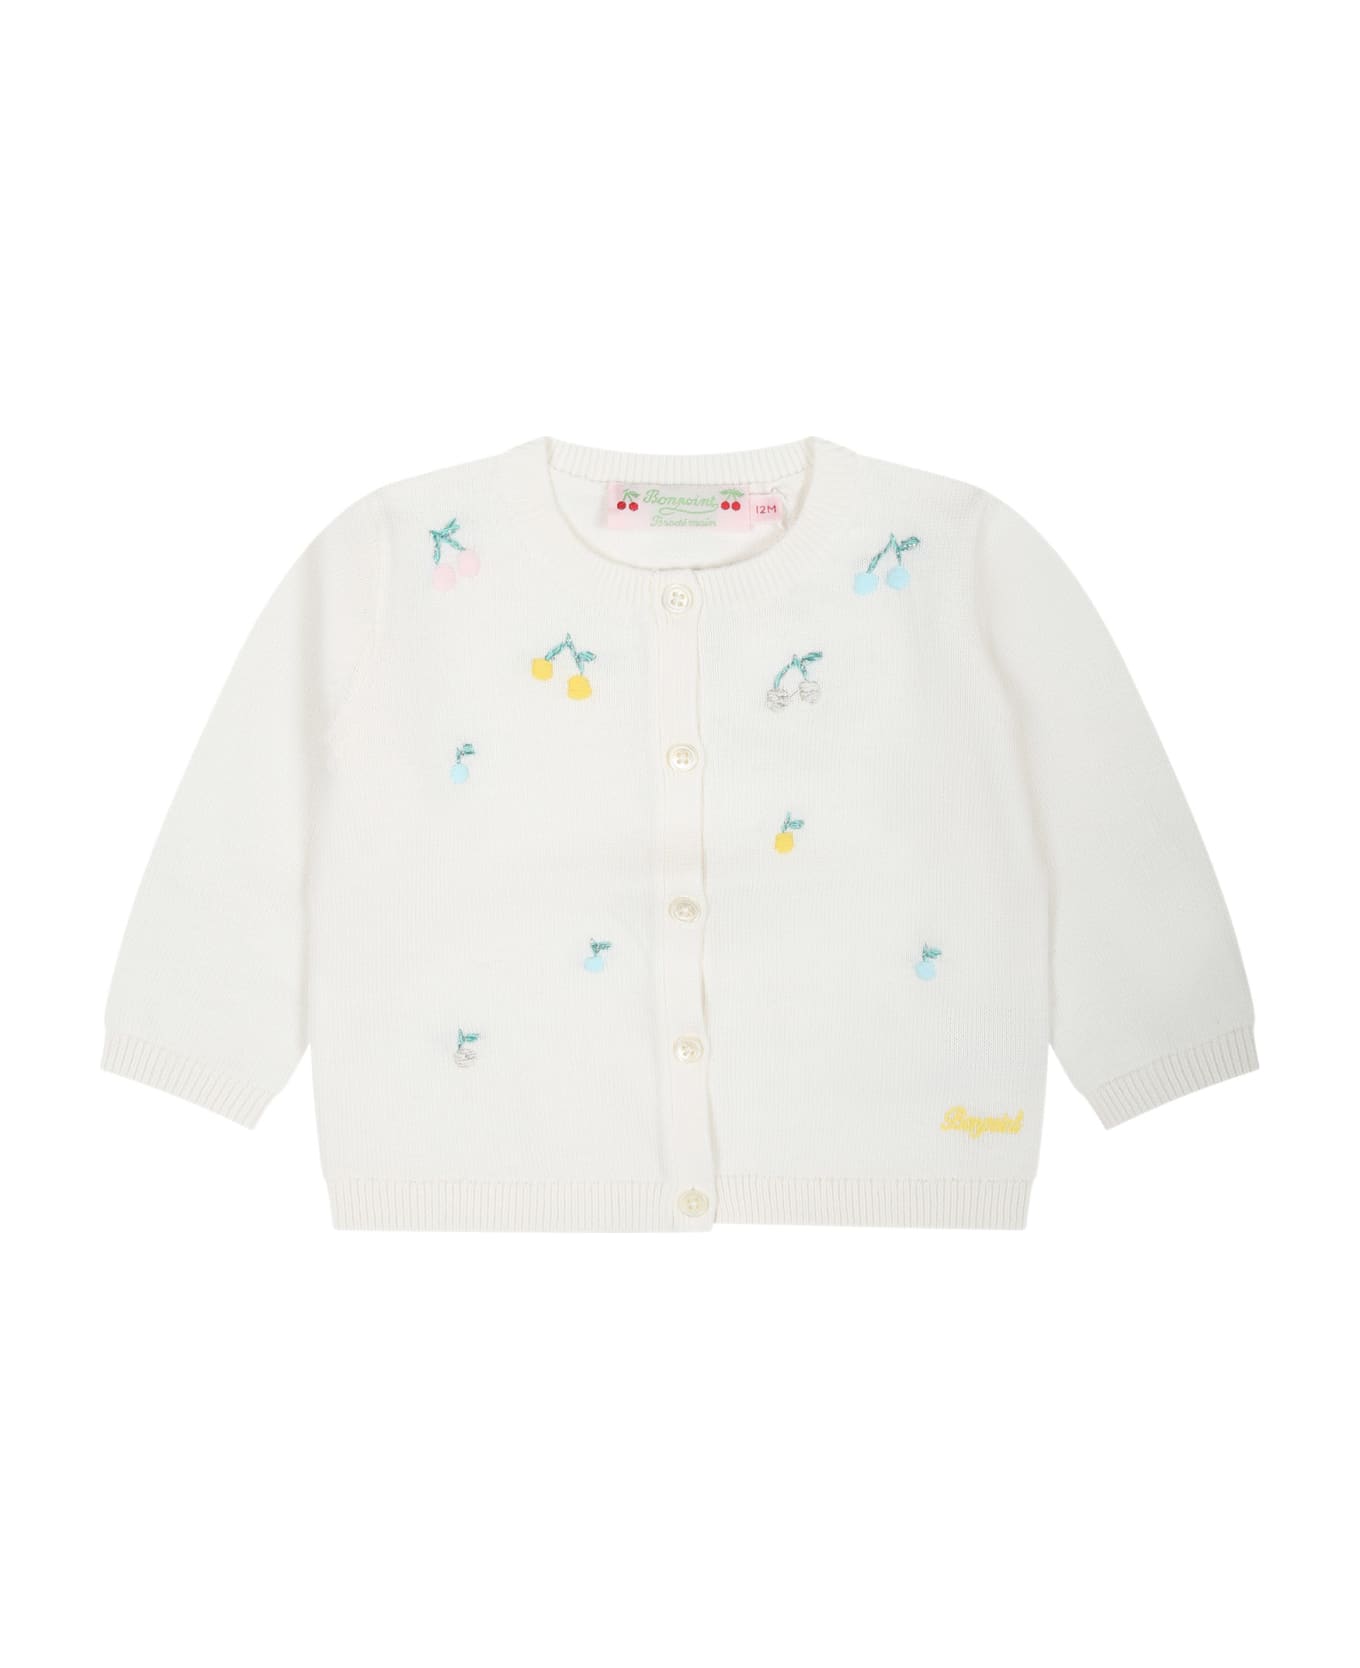 Bonpoint White Cardigan For Baby Girl With All-over Embroidered Cherries - Avorio